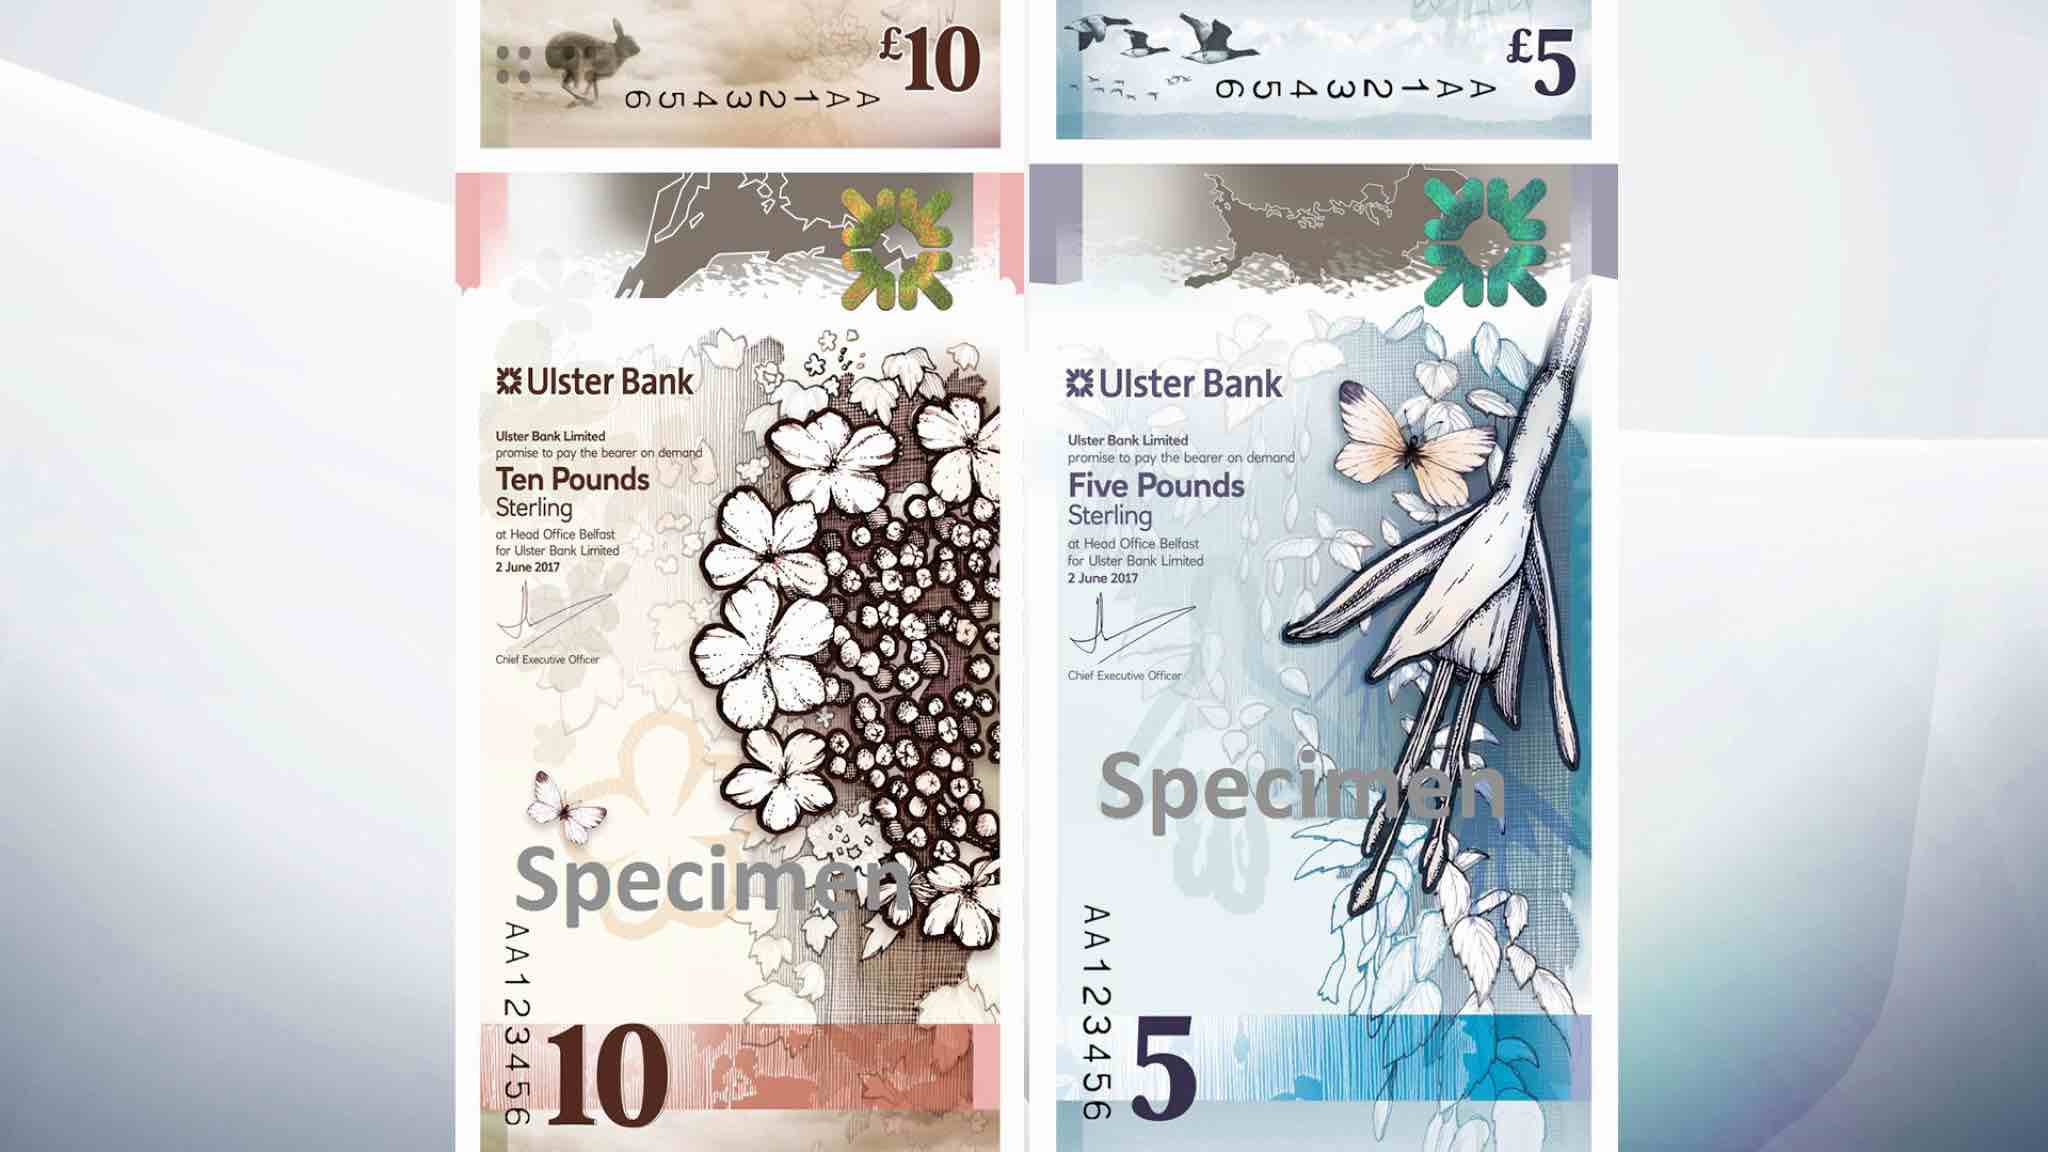 Vertical Bank notes to be released in 2019